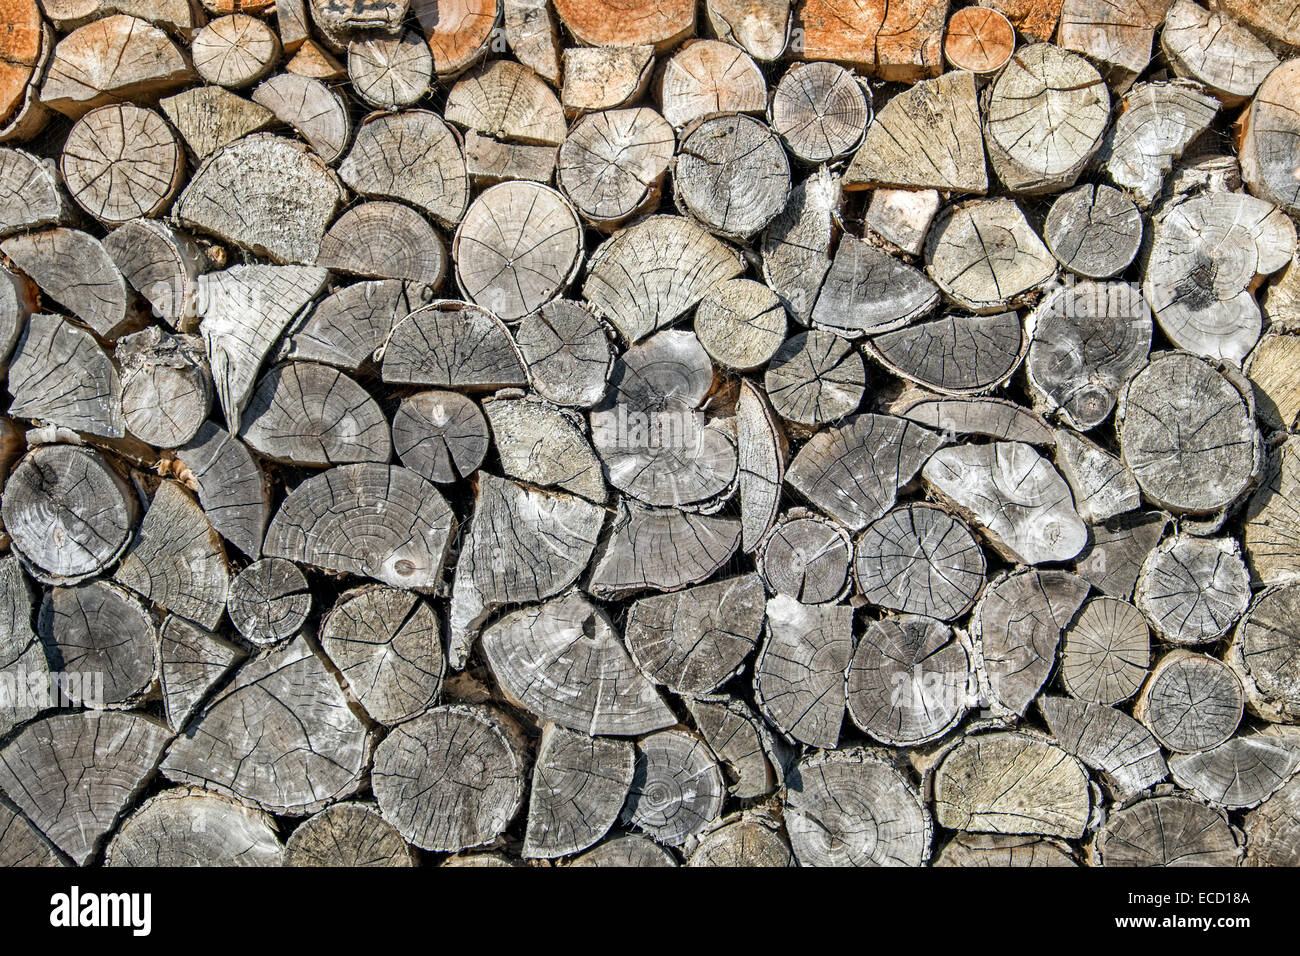 The sawn ends of logs in a woodpile Stock Photo